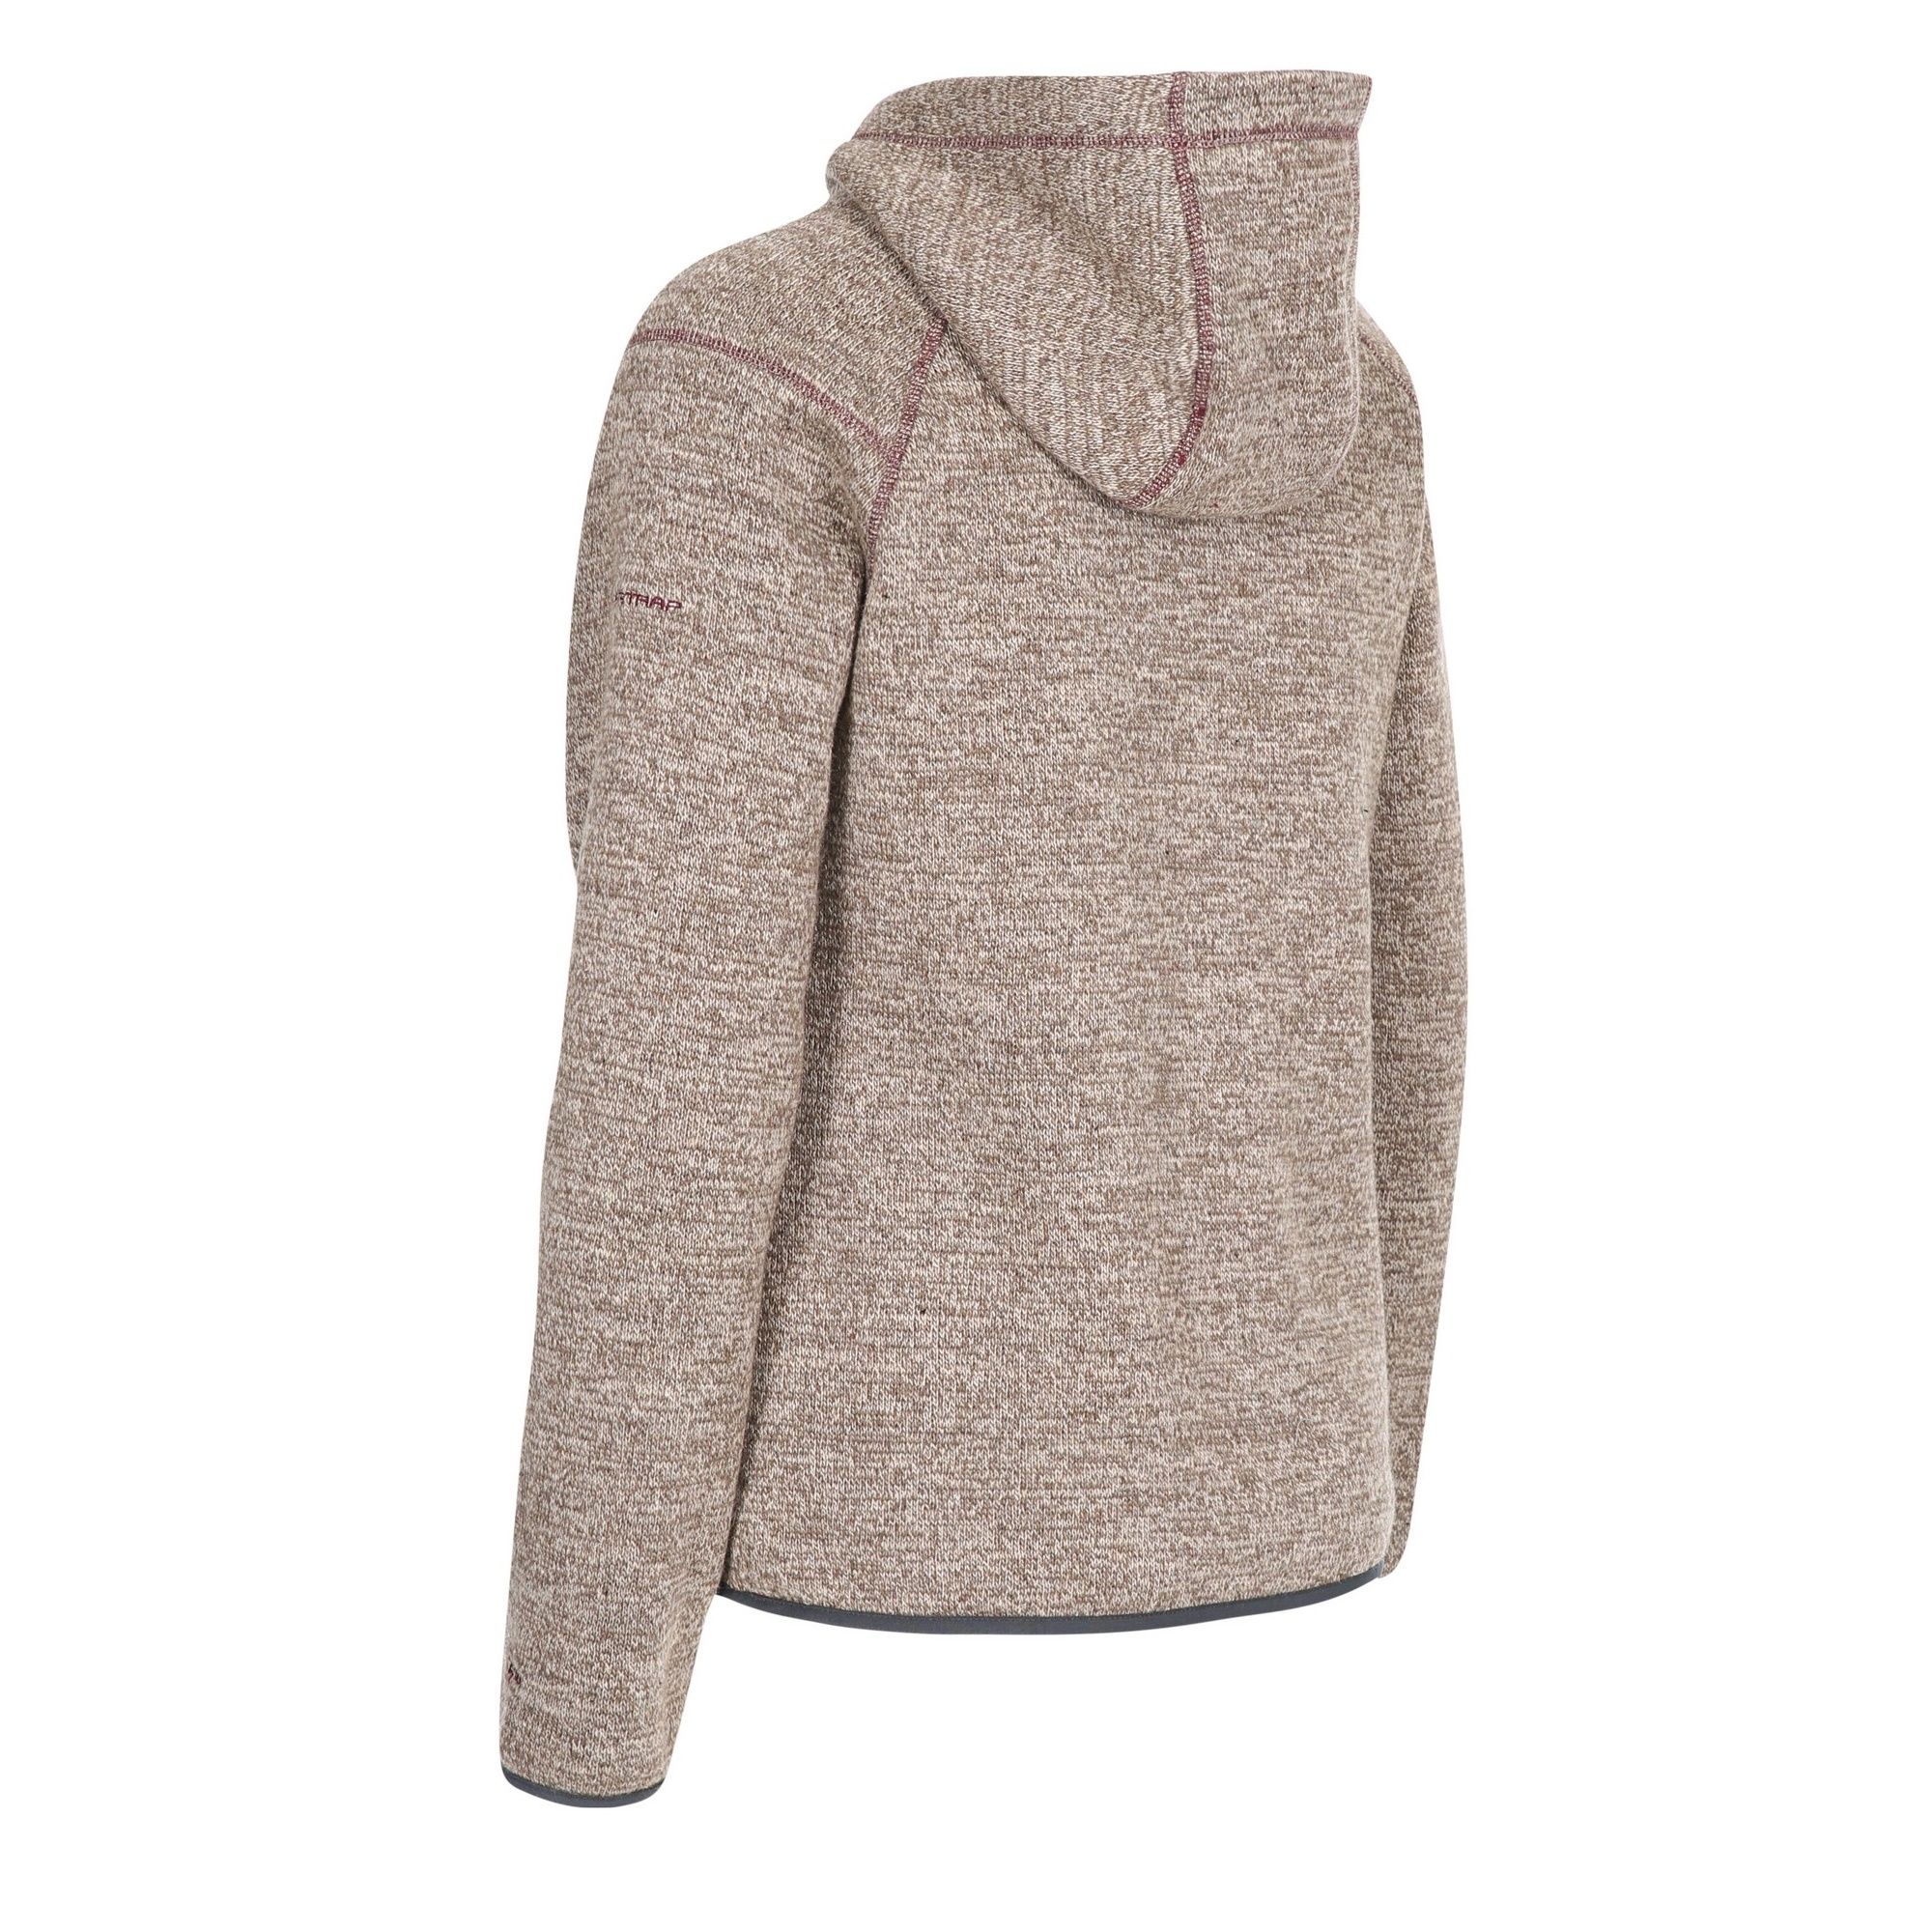 Bonded knitted marl fleece. Long haired contrast fleece at back. Full front zip. 2 zipped hand pockets. Grown on hood. Stretch binding at cuffs and hem. Airtrap. 500gsm. 70% Polyester, 30% Acrylic. Trespass Womens Chest Sizing (approx): XS/8 - 32in/81cm, S/10 - 34in/86cm, M/12 - 36in/91.4cm, L/14 - 38in/96.5cm, XL/16 - 40in/101.5cm, XXL/18 - 42in/106.5cm.